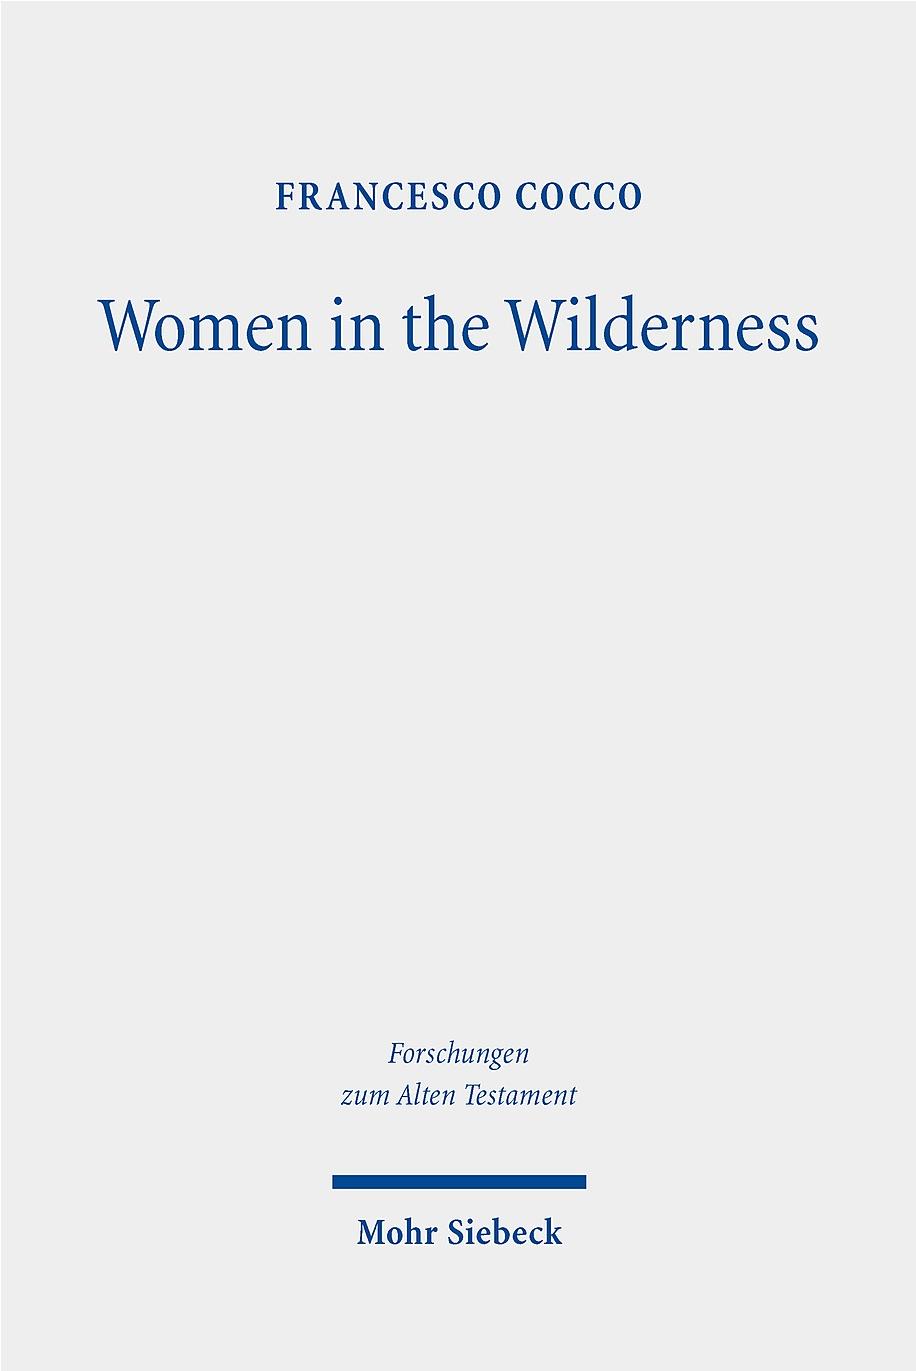 Women in the Wilderness by Francesco Cocco